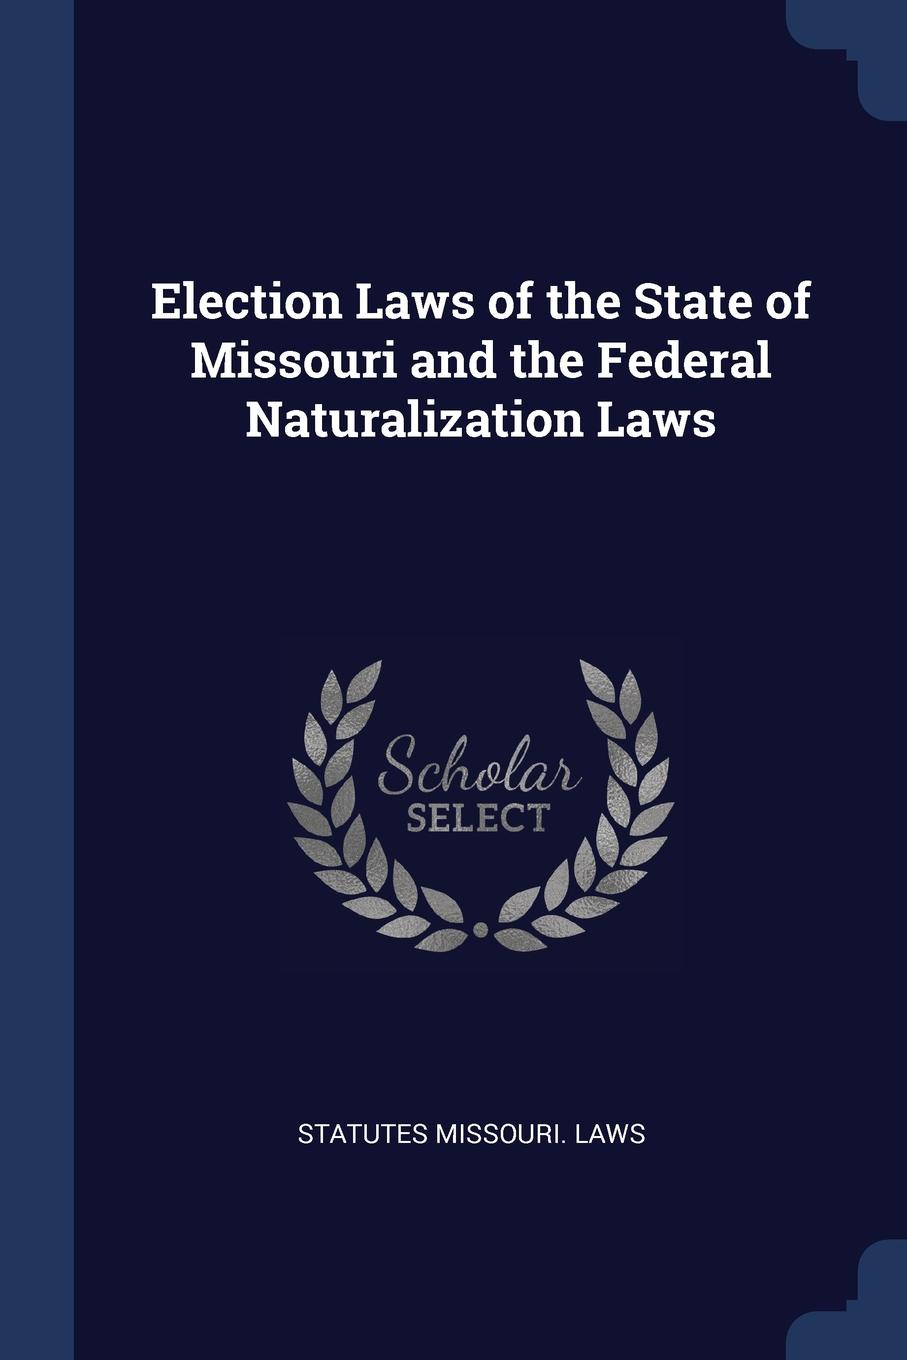 Election Laws of the State of Missouri and the Federal Naturalization Laws